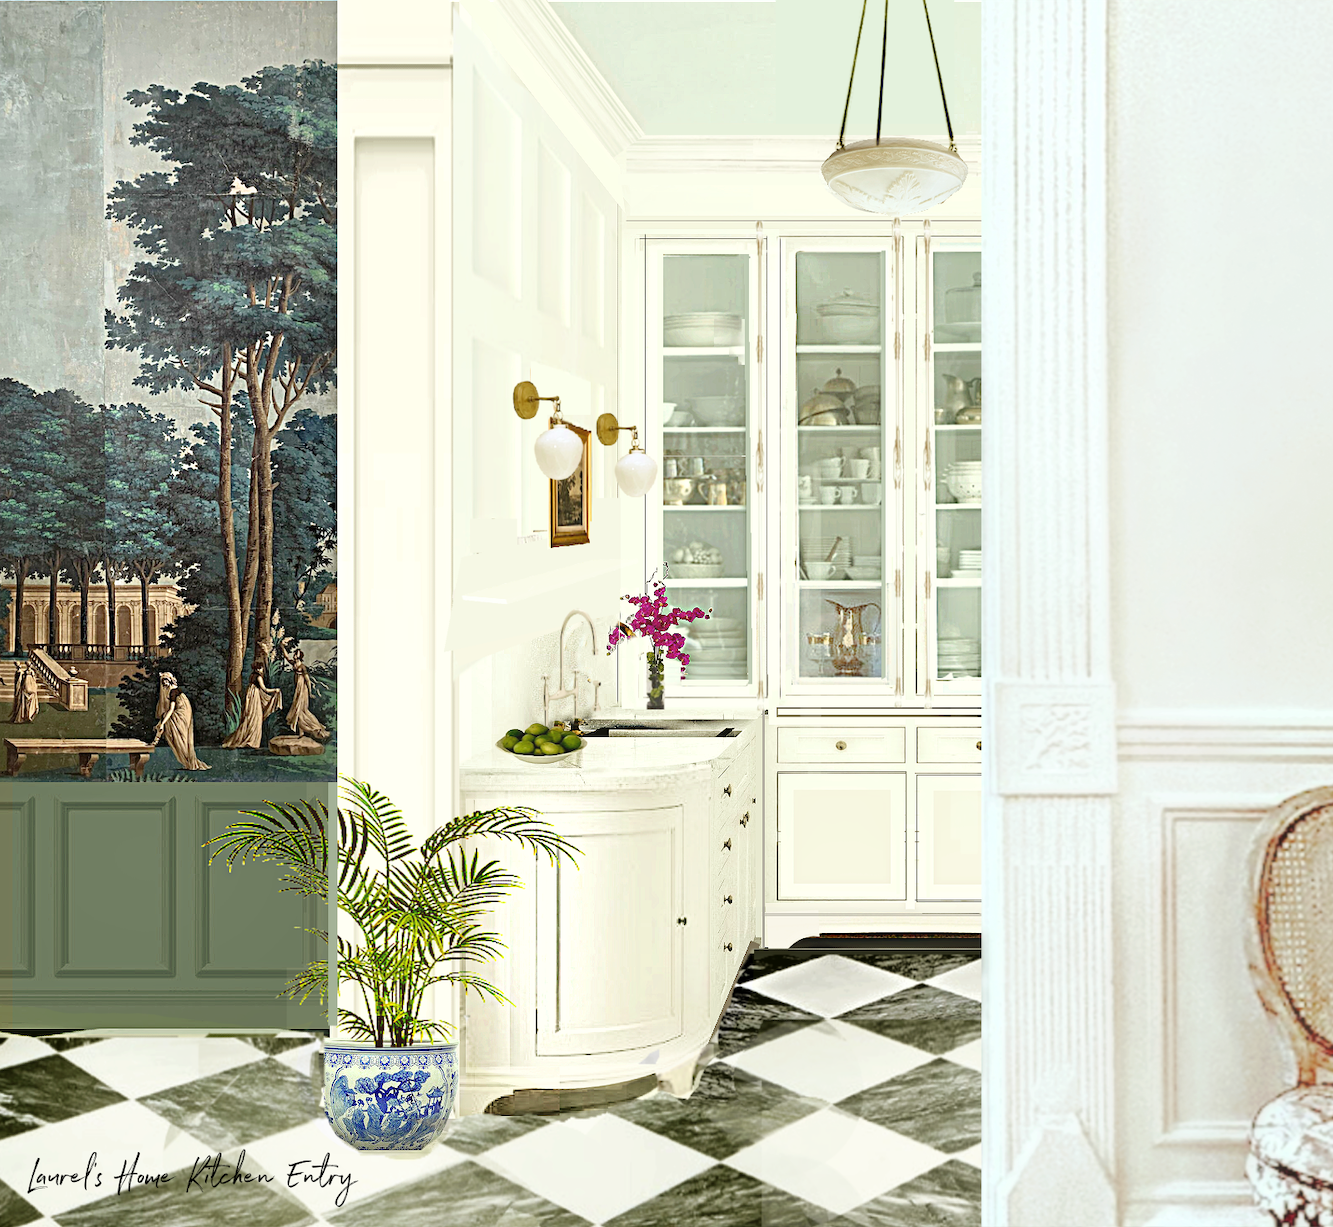 kitchen render my new kitchen fantasy antique Dufour Jardin Anglais - home furnishings